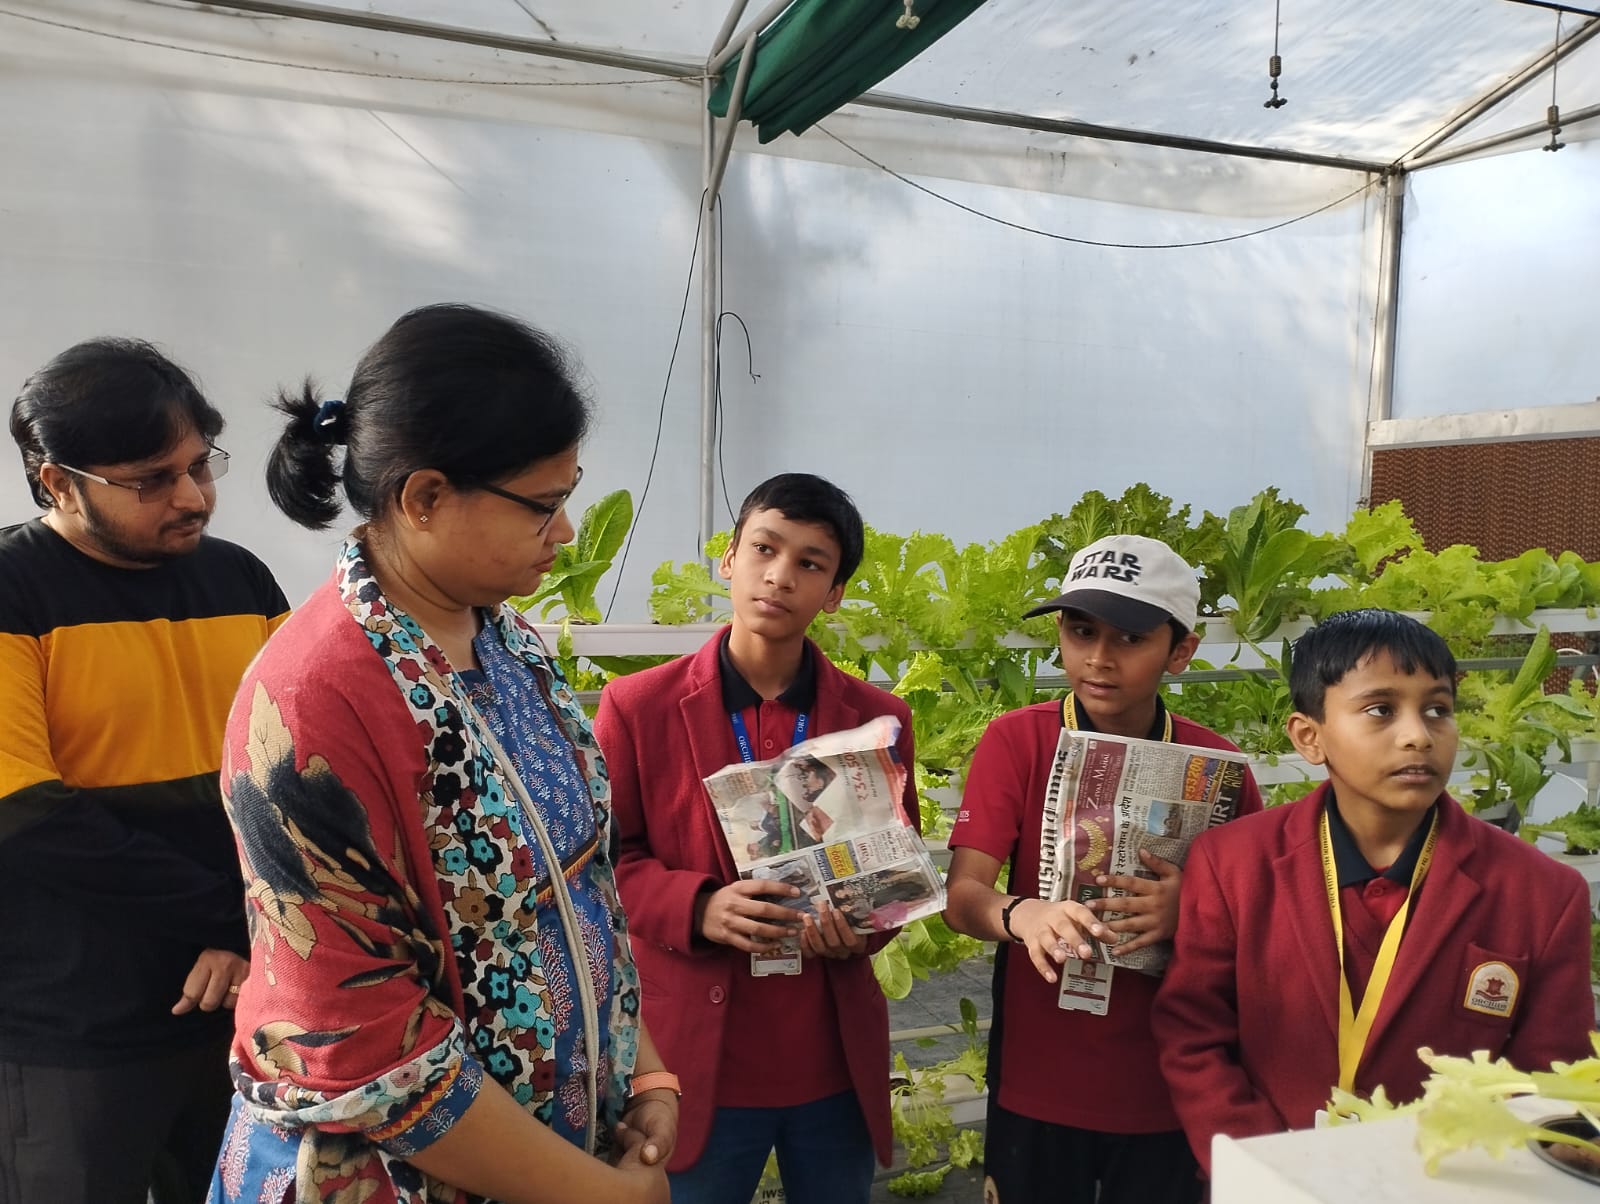 You are currently viewing Students of Orchids The International School organizes Budding Farmers Market, produce and sell self grown vegetables at the school’s polyhouse